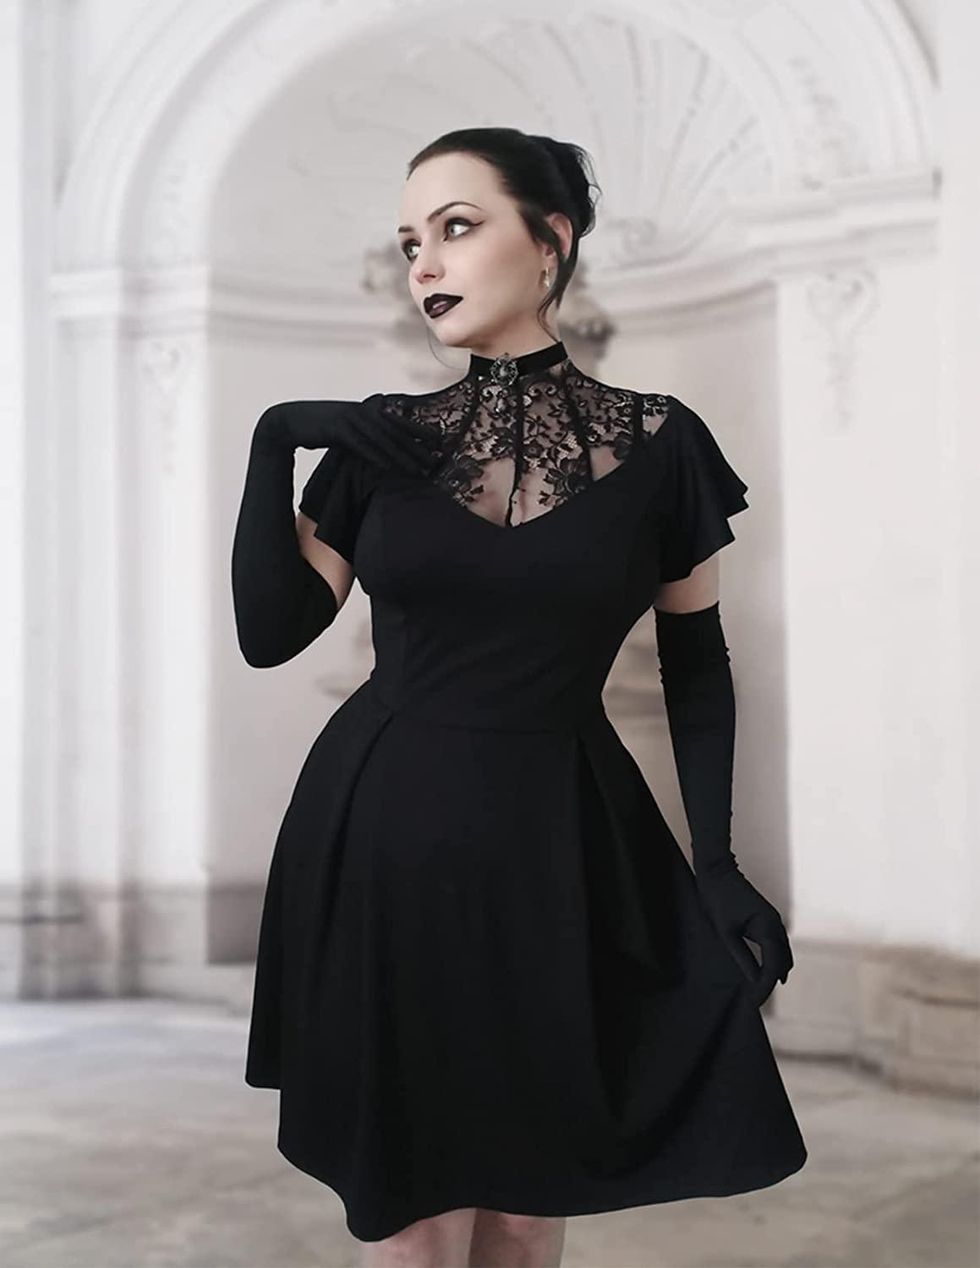 gothic romance style wednesday addams fit and flare lace dress